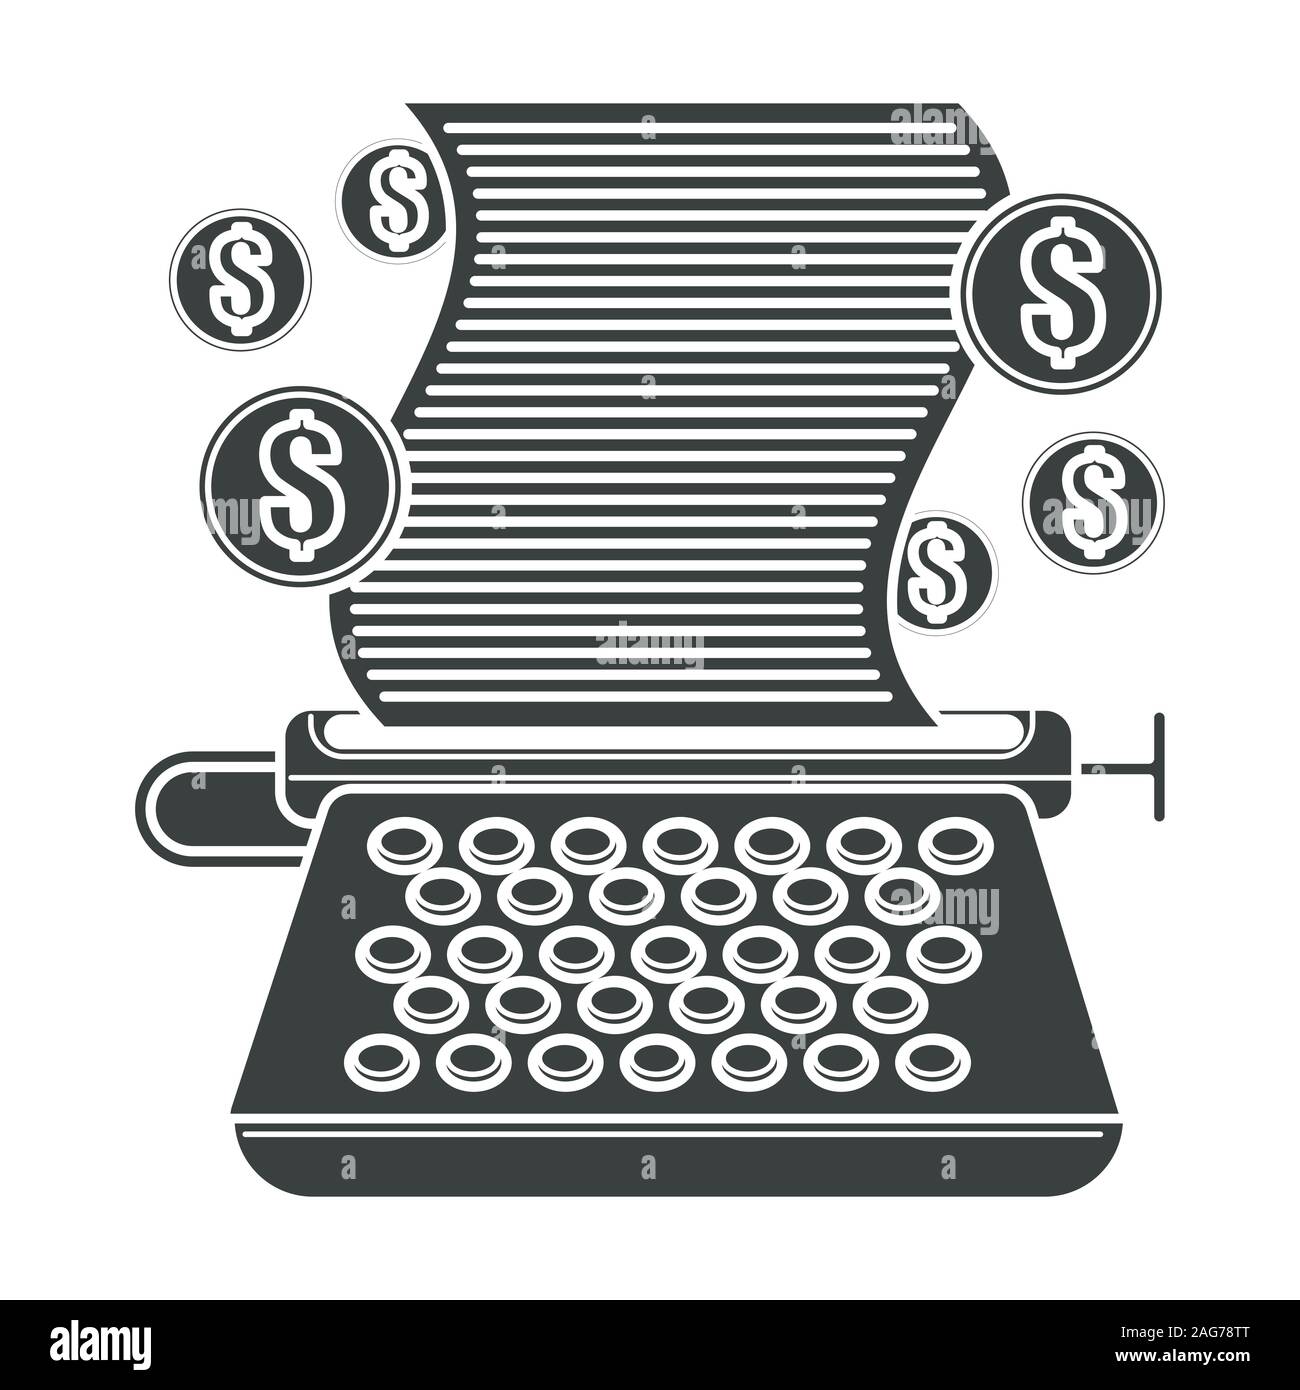 Typing machine with paper and dollar coins floating around Stock Vector